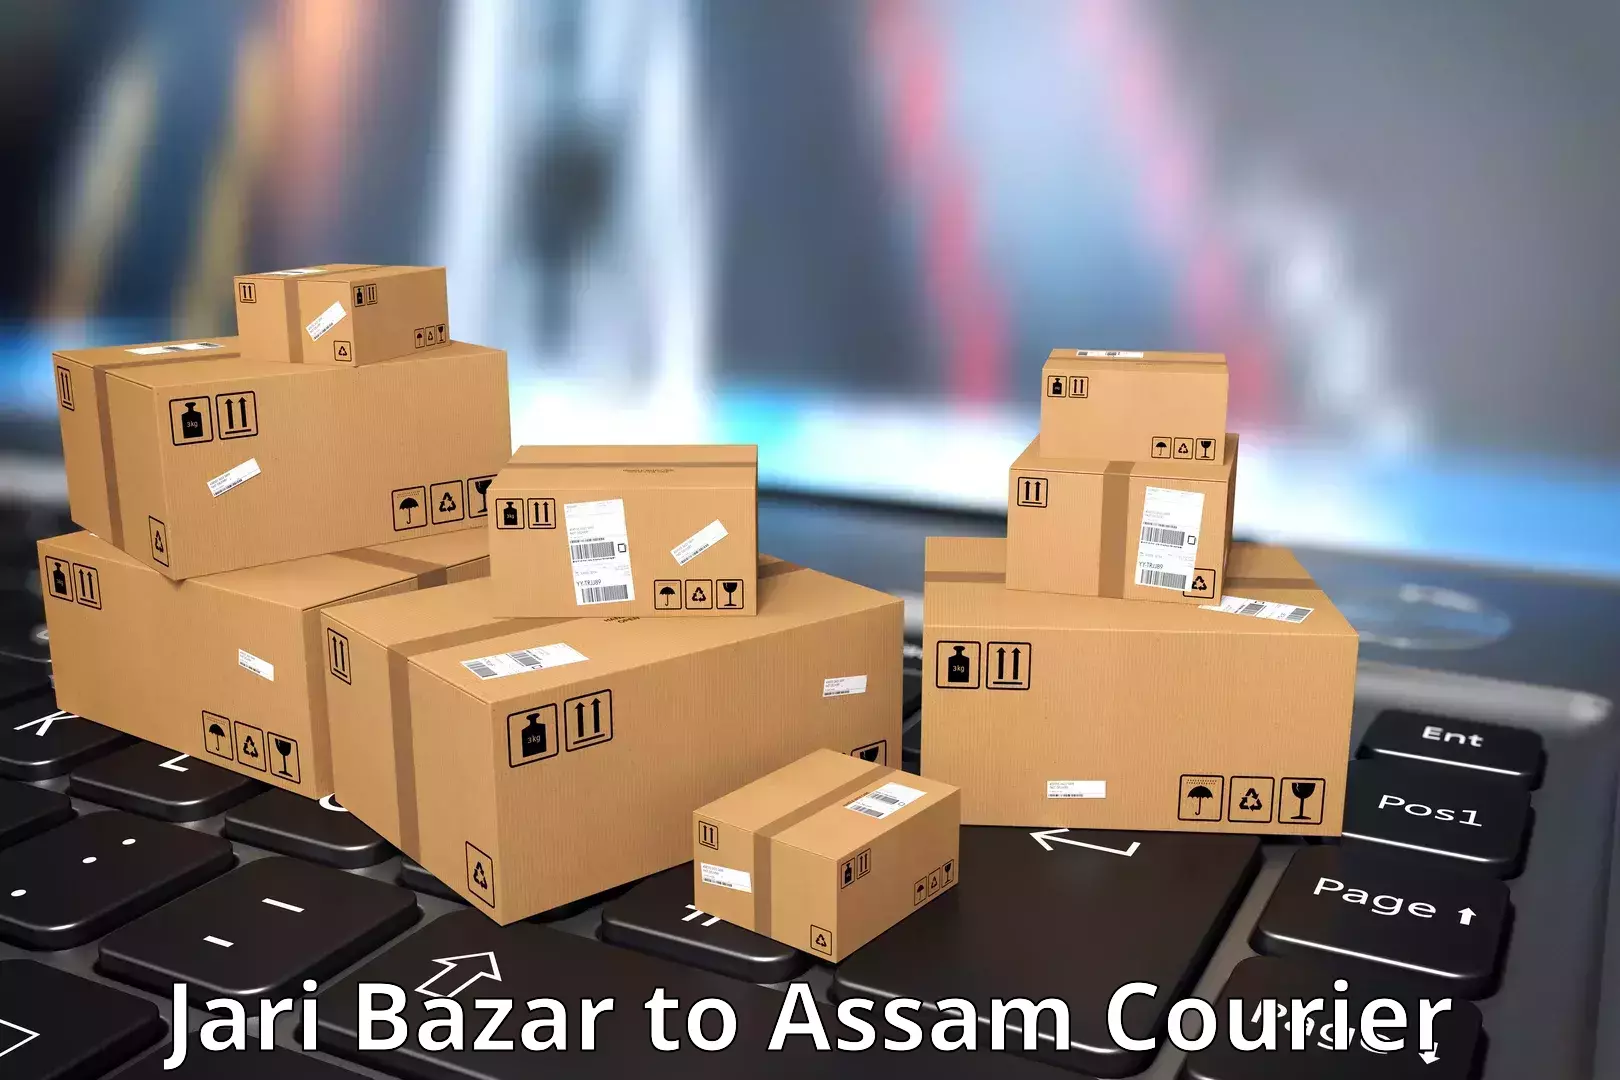 State-of-the-art courier technology Jari Bazar to Assam